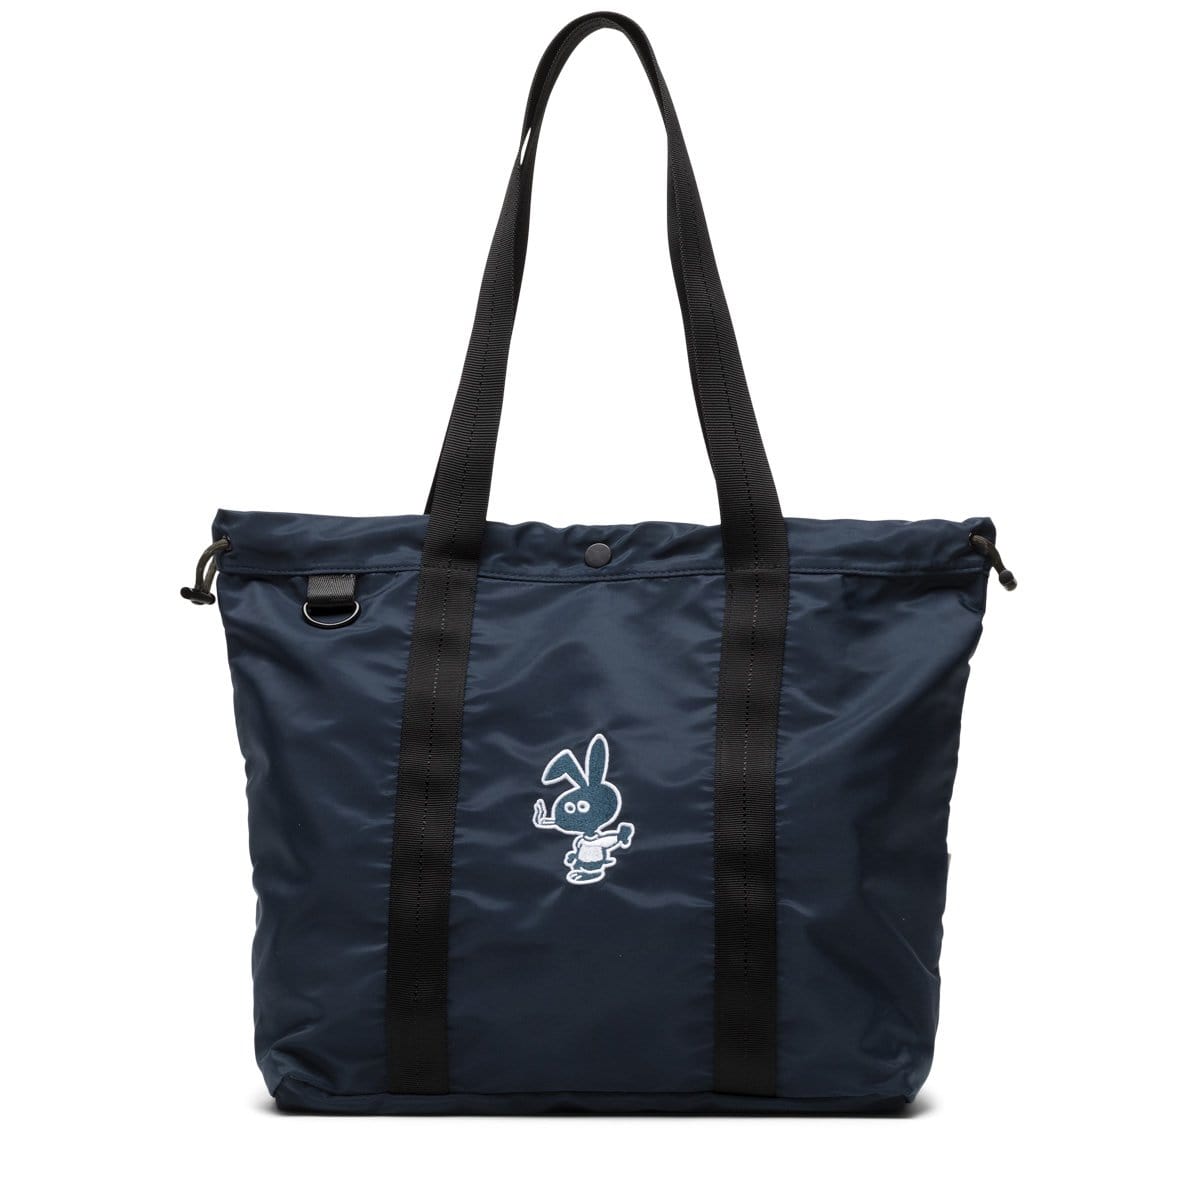 Cold World Frozen Goods Bags NAVY / O/S BUNNY FLANKER TOTE